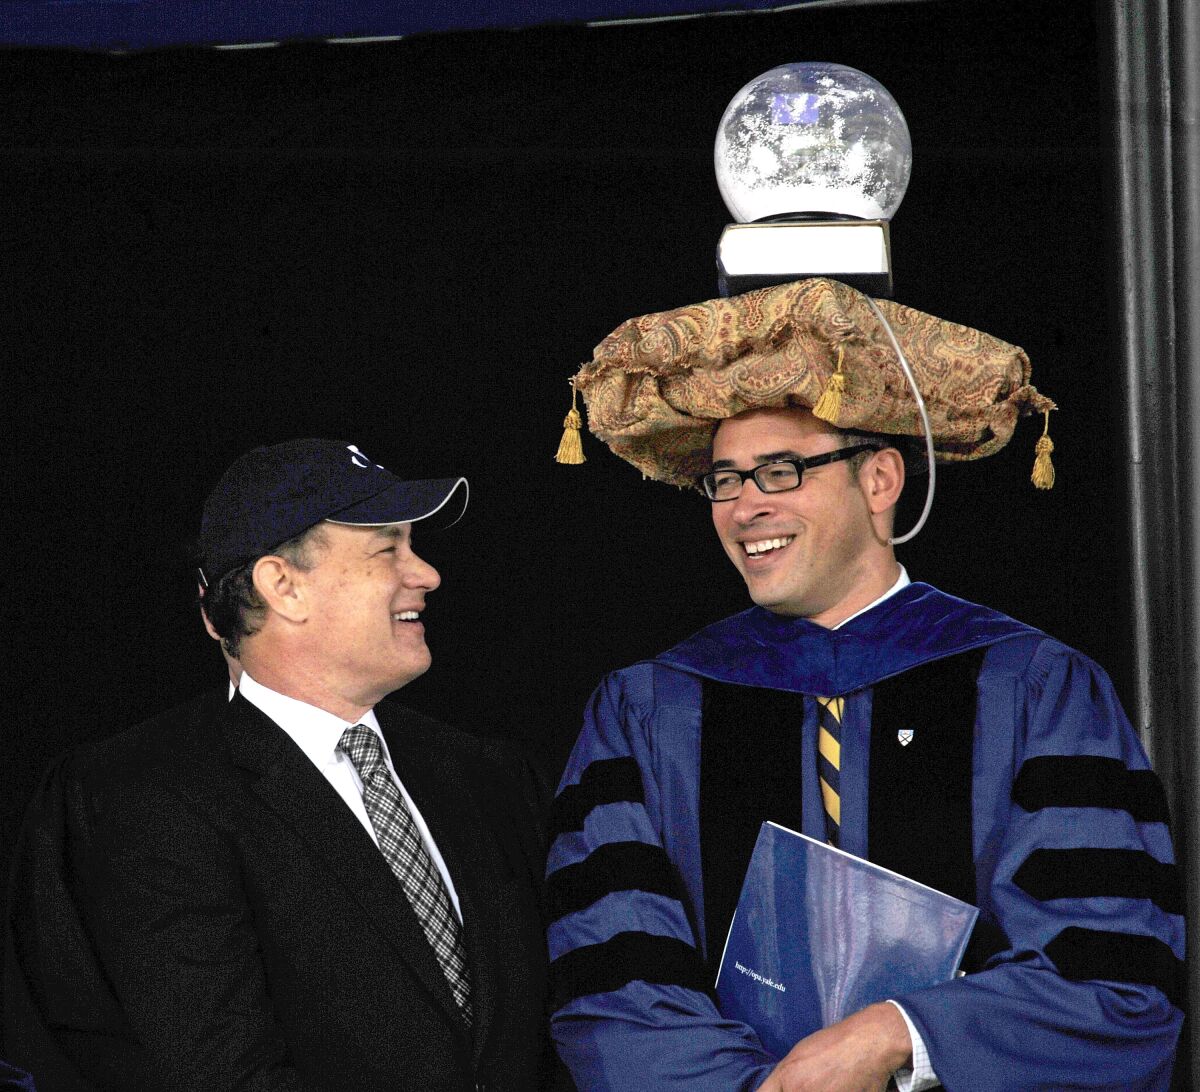 Tom Hanks attends the 2011 Yale University Class Day in 2011.